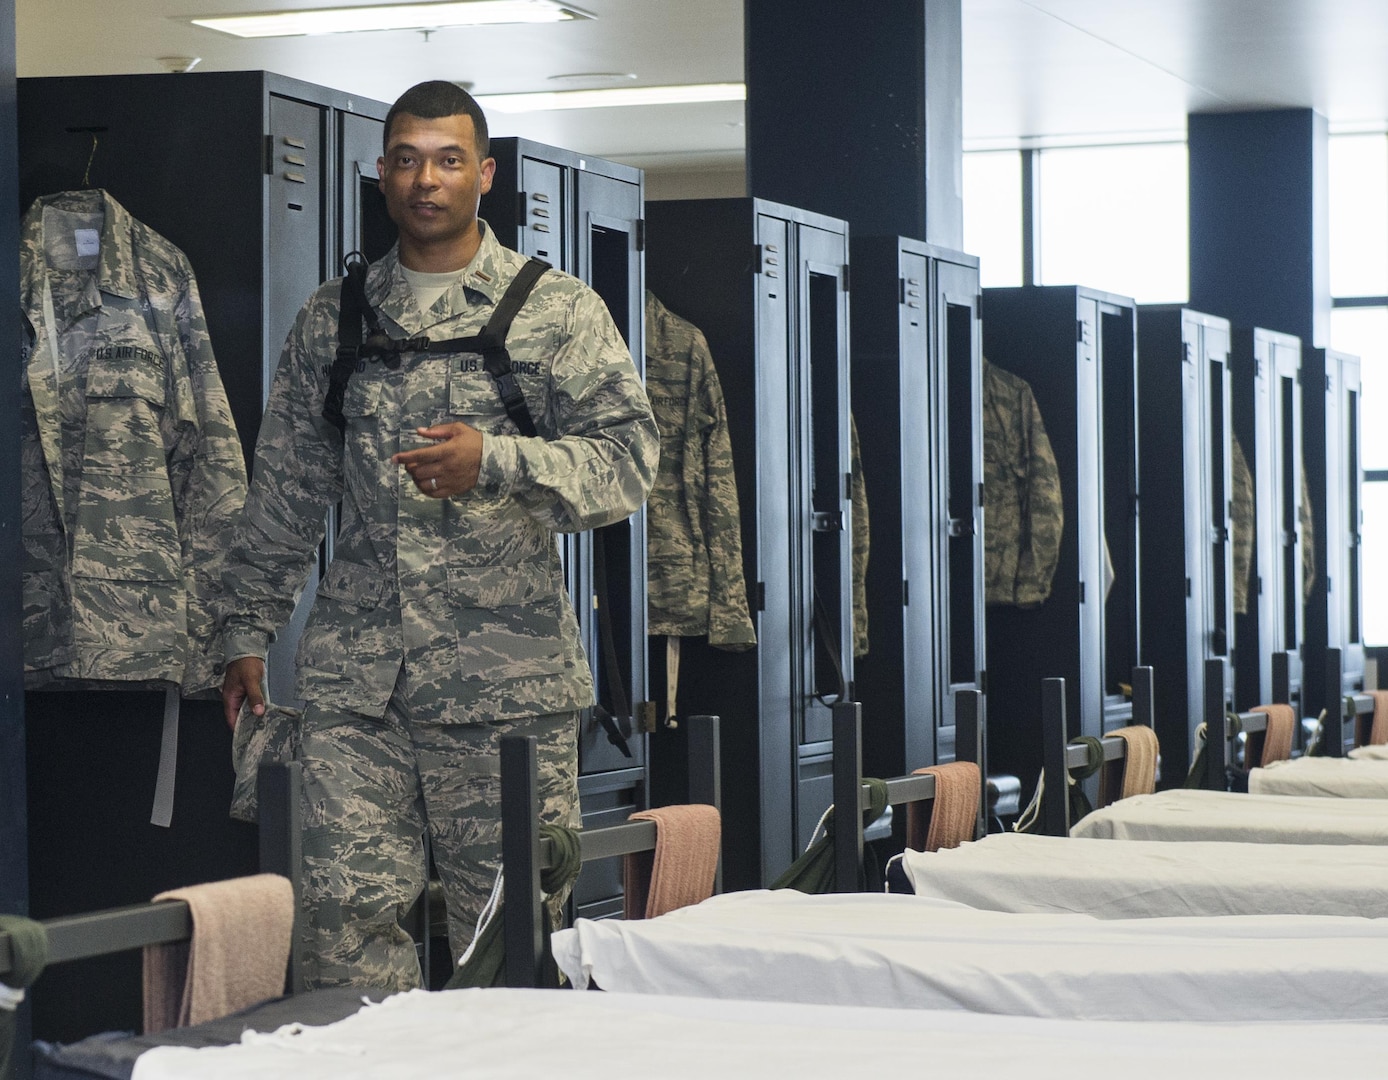 A chaplain candidate tours an Airman Training Complex's dorm at Joint Base San Antonio-Lackland, Texas, July 5, 2017. The tour was part of the Chaplain Candidate Intensive Internship. (U.S. Air Force photo by Senior Airman Krystal Wright)